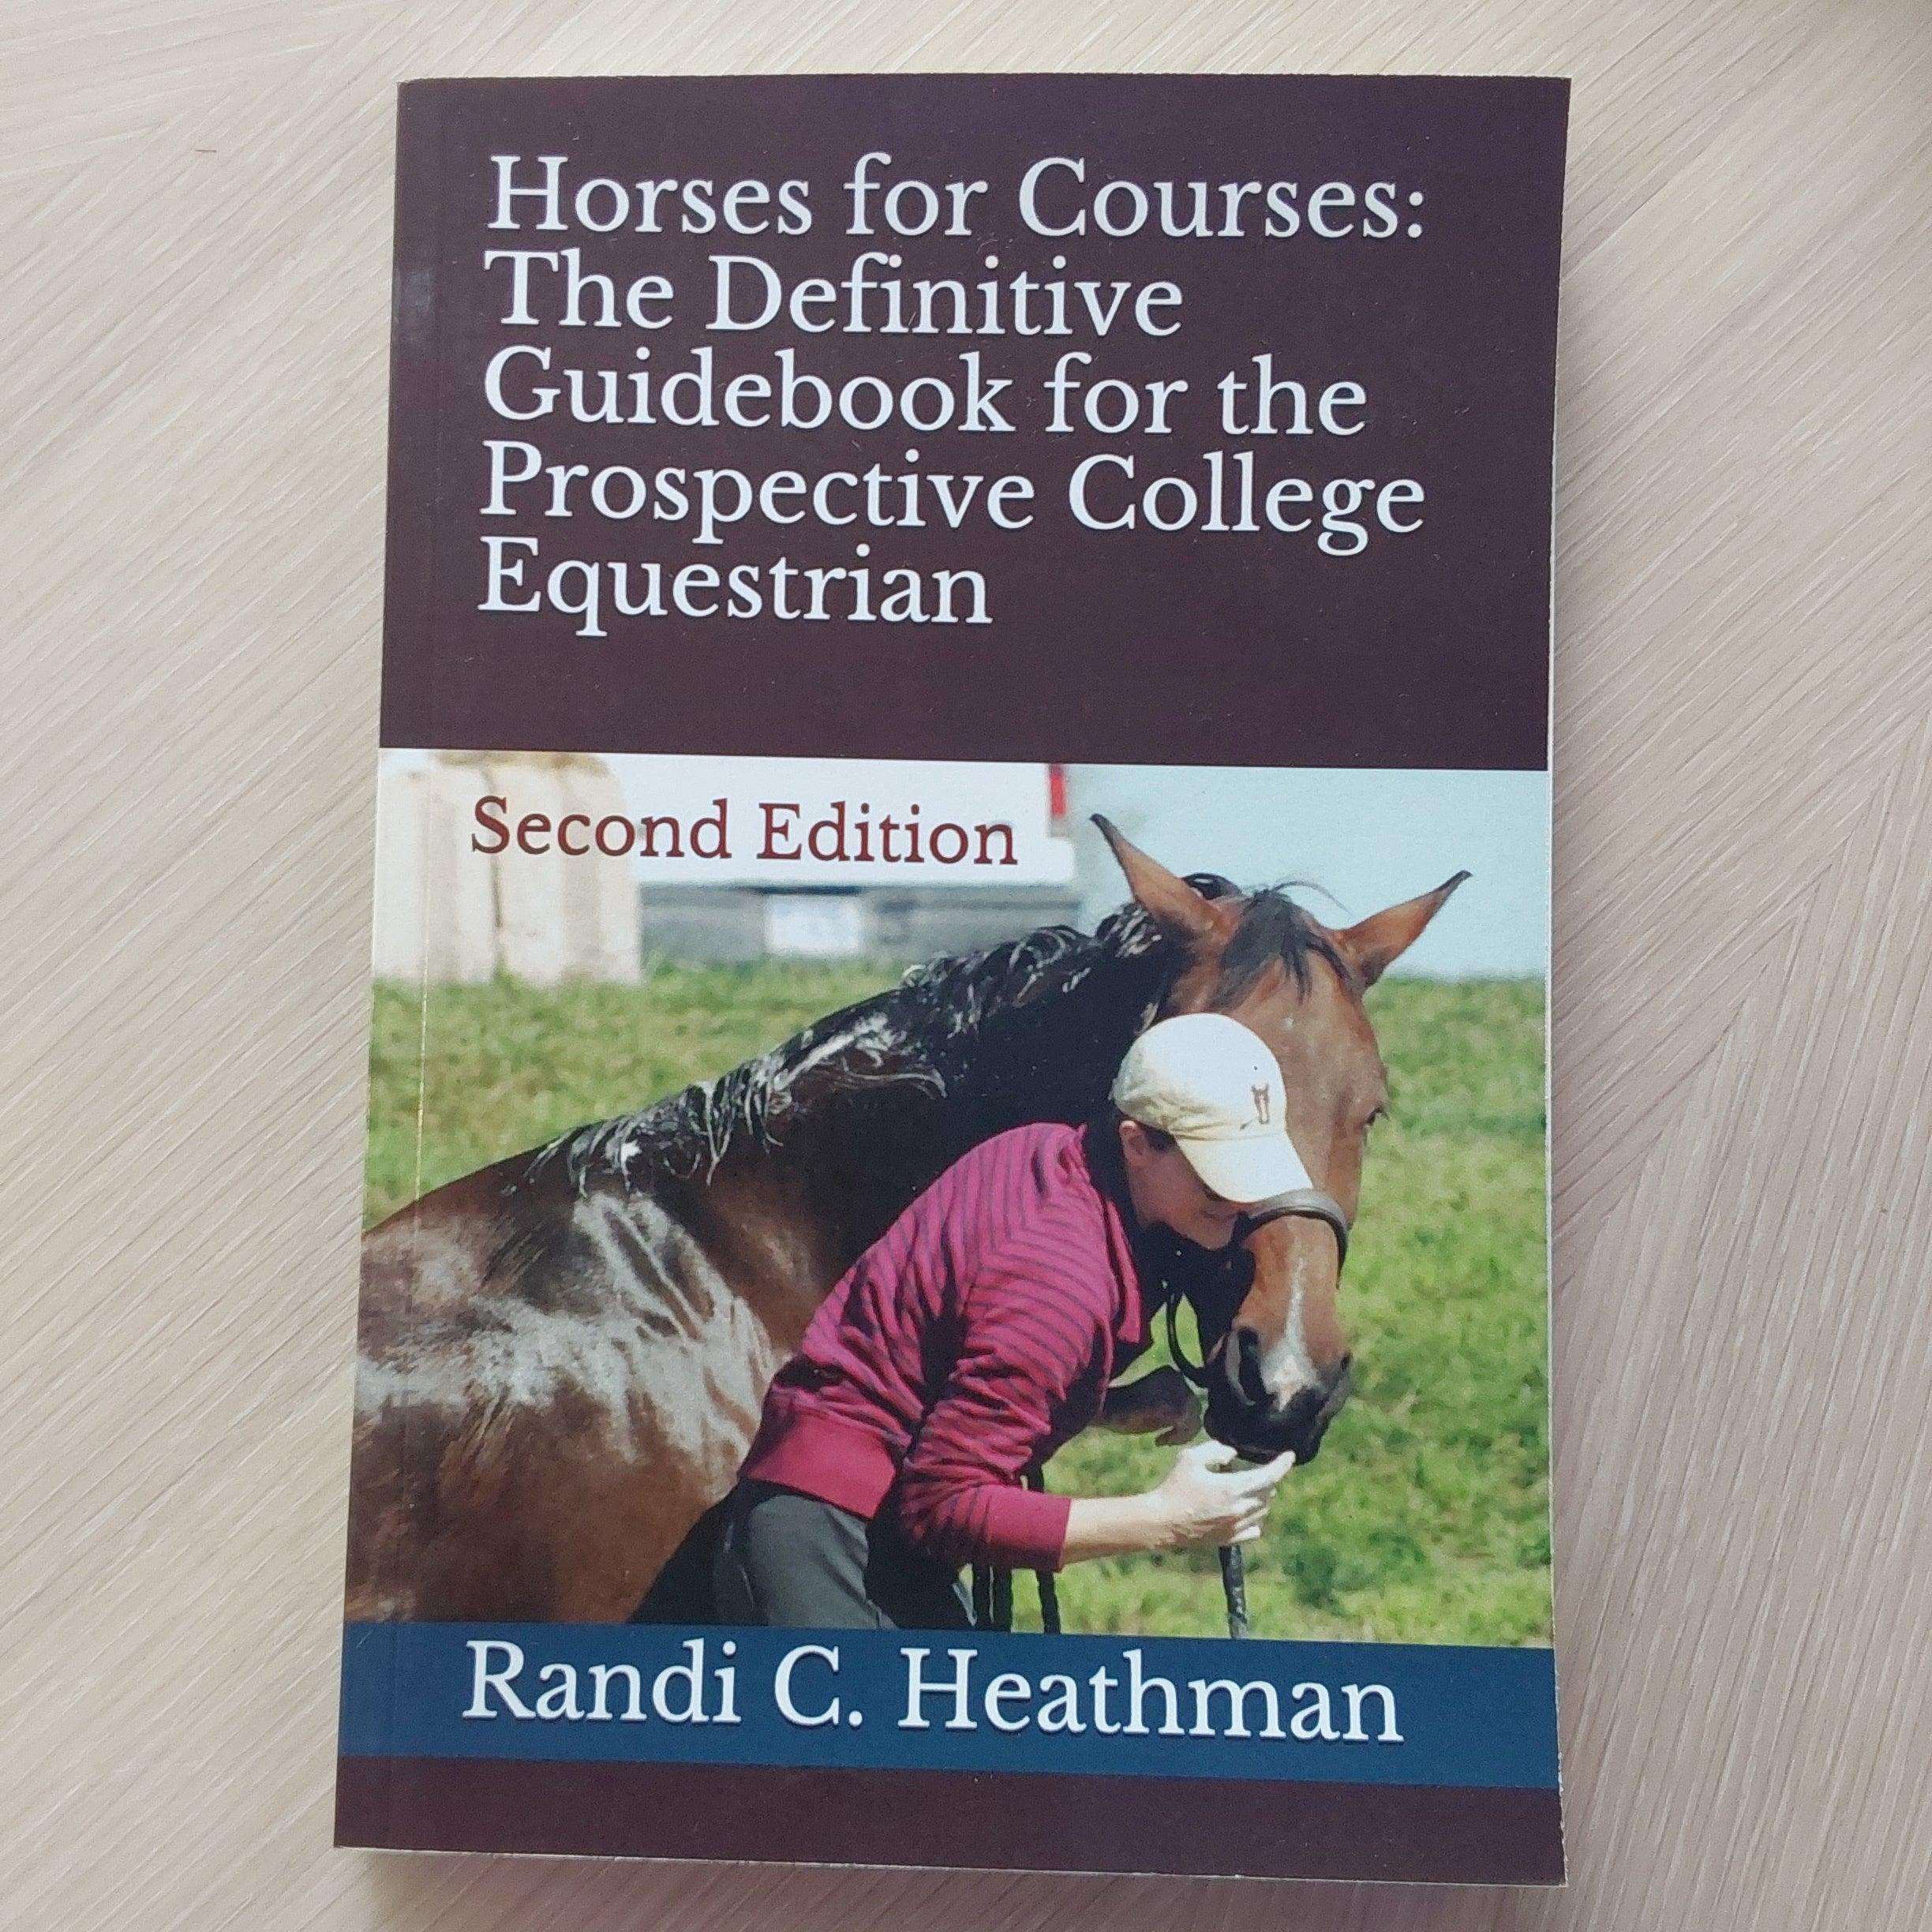 Horses for Courses: The Definitive Guidebook for the Prospective College Equestrian (Second Edition) (paperback) - The In Gate